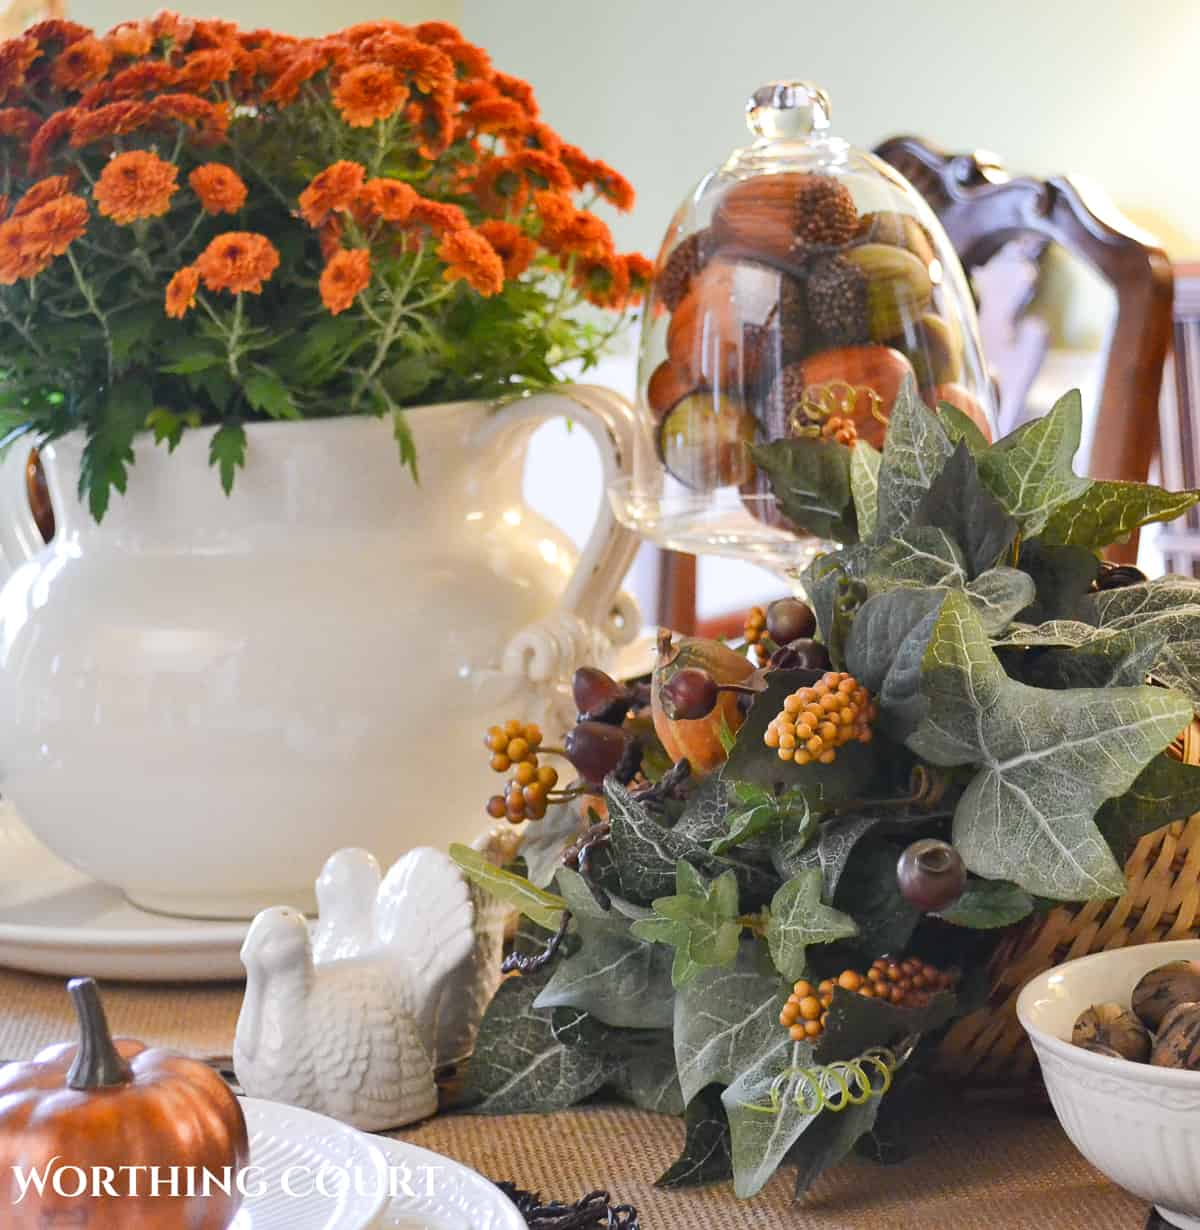 4 Thanksgiving Designs And Ideas For Your Dinner Table